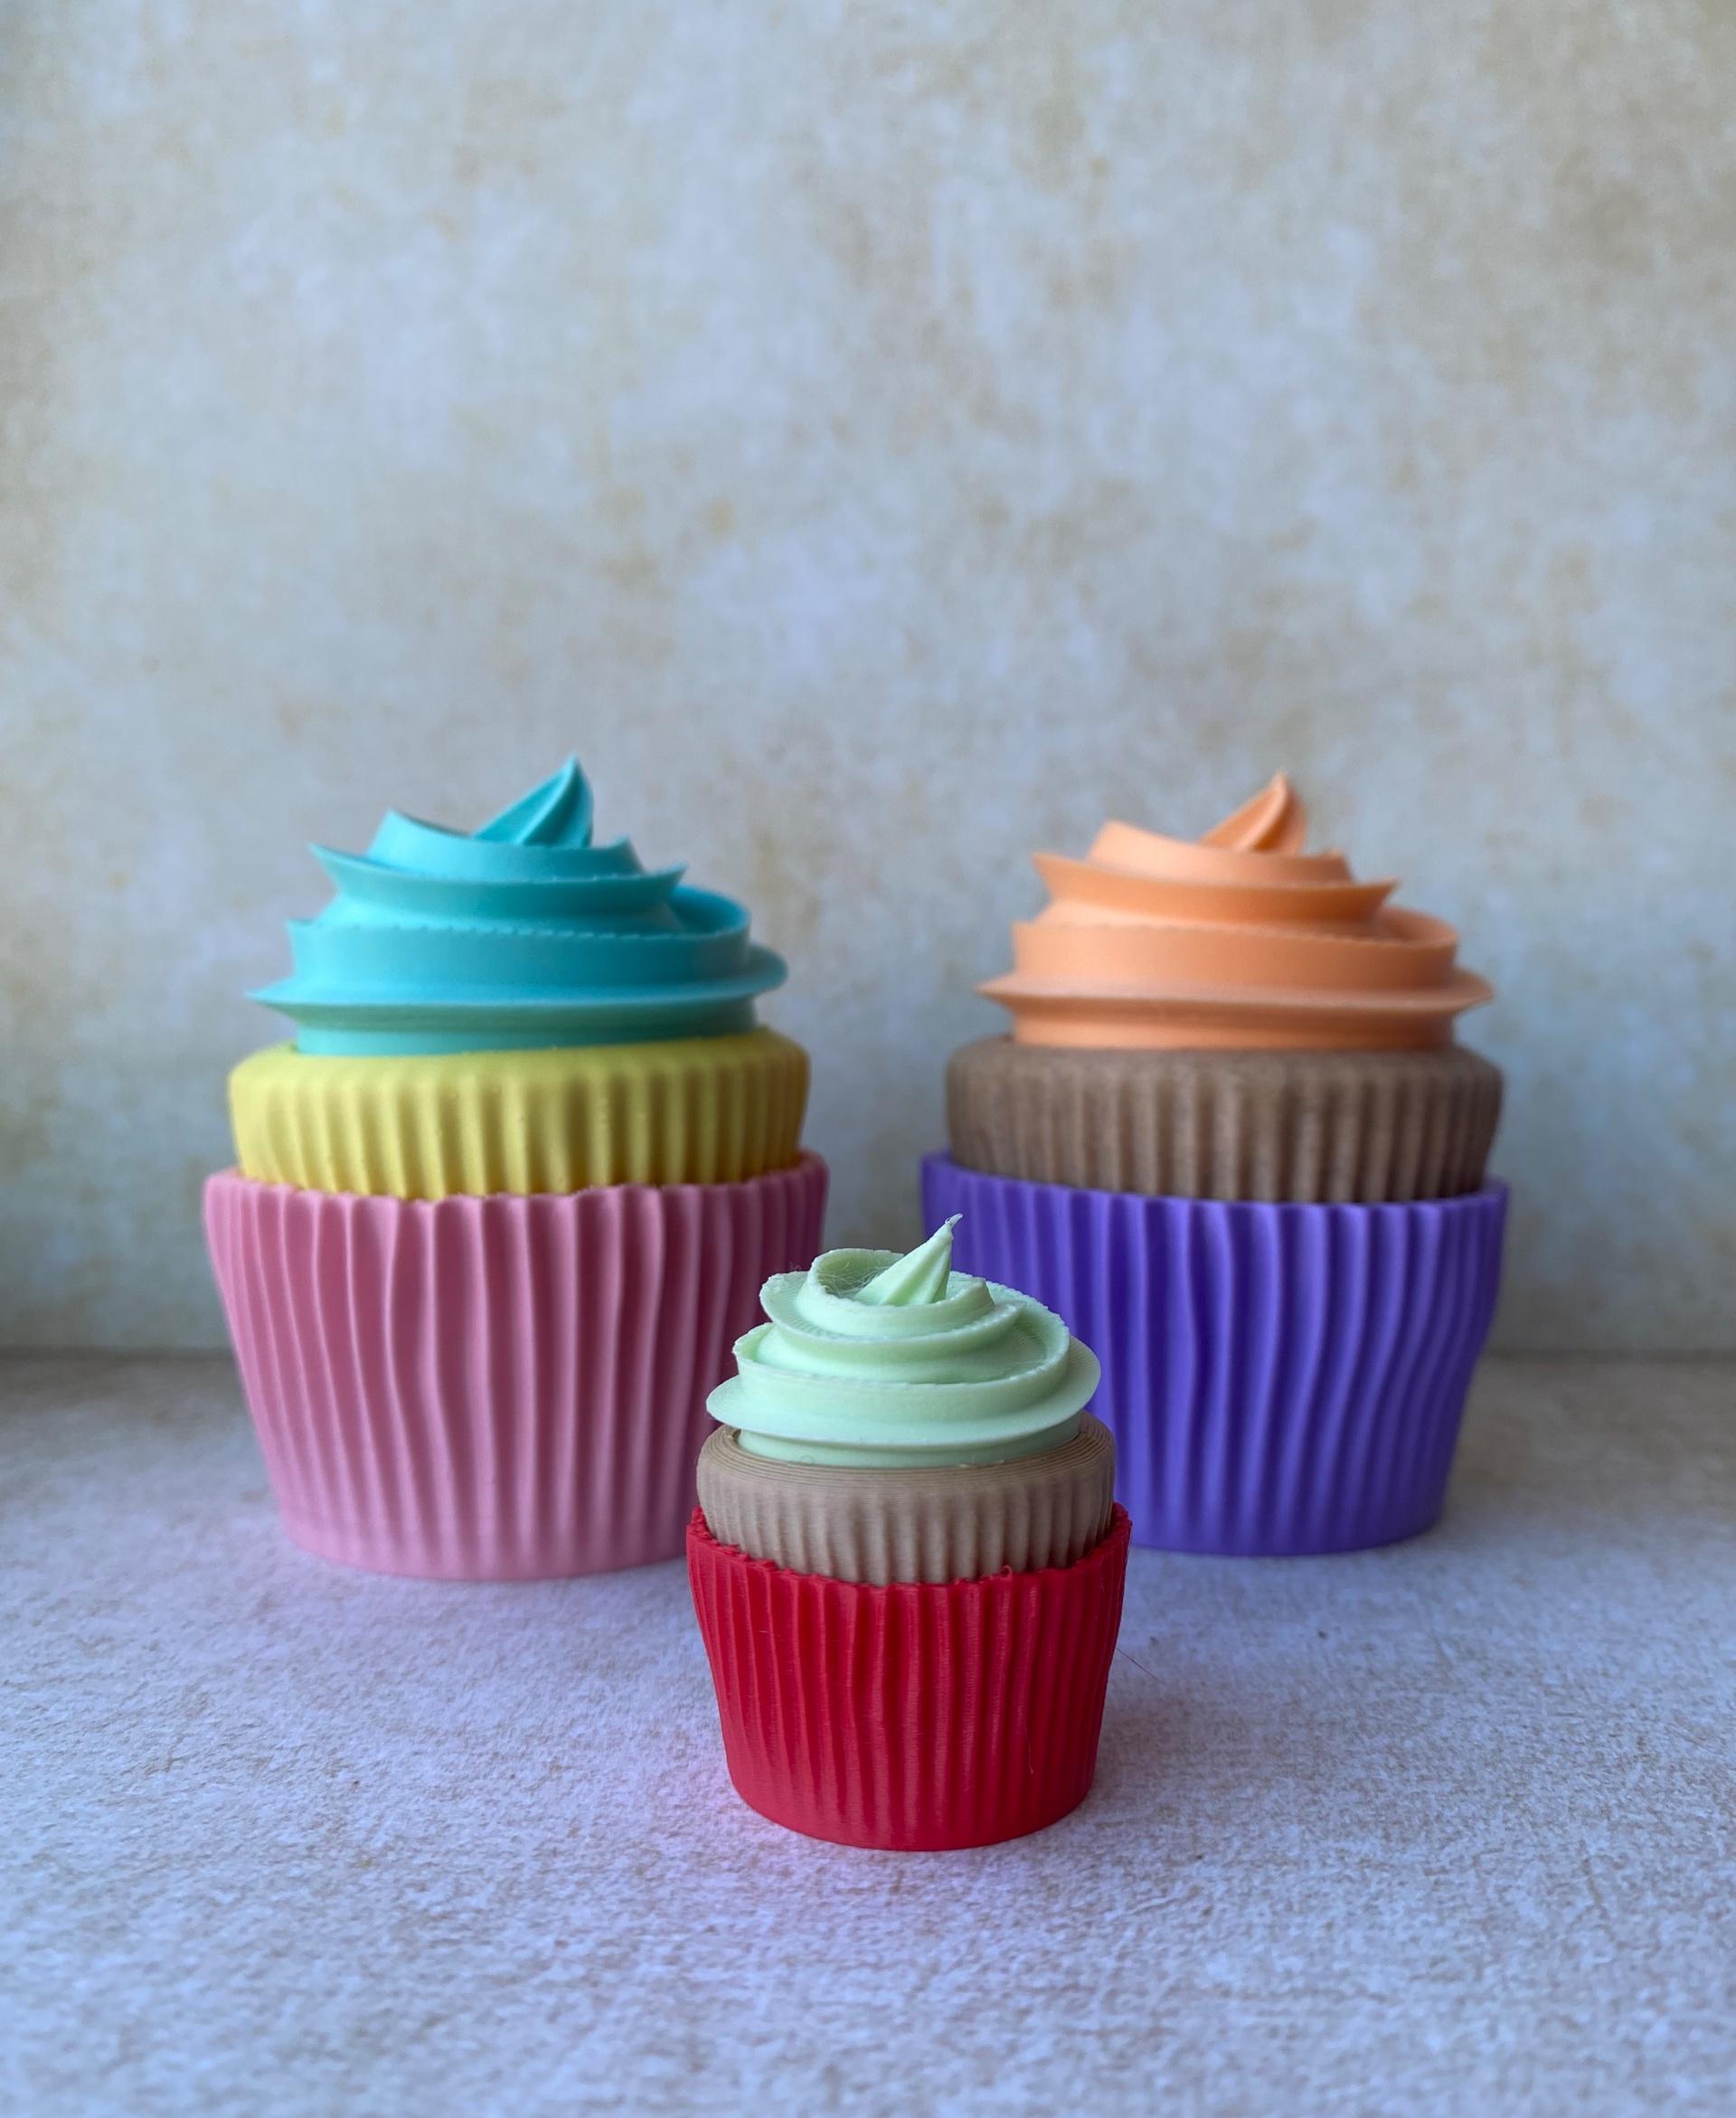 Cupcake #1 - Delicious colorful cupcakes! 100% & 50%
Polymaker filament. - 3d model